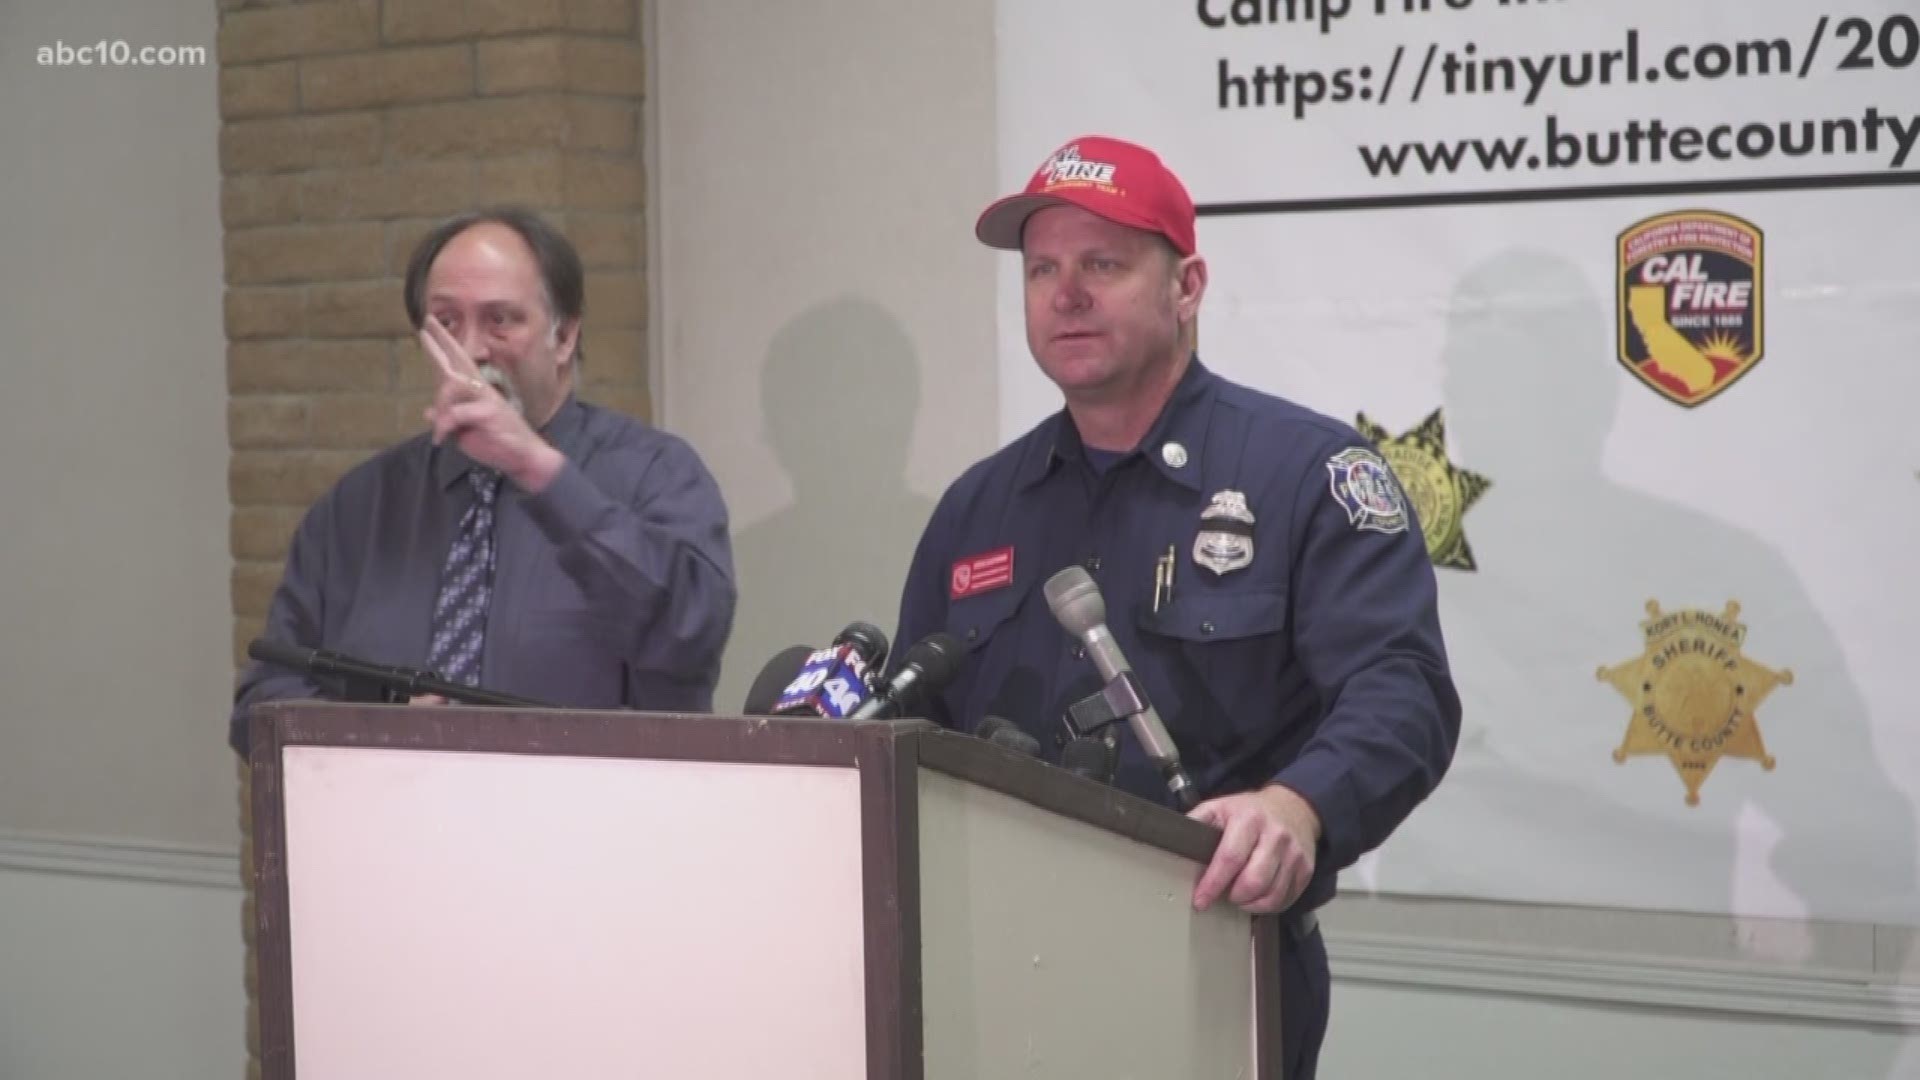 During an update on Sunday night, Butte County Sheriff Kory Honea said 220 individuals were unaccounted for in the Camp Fire.